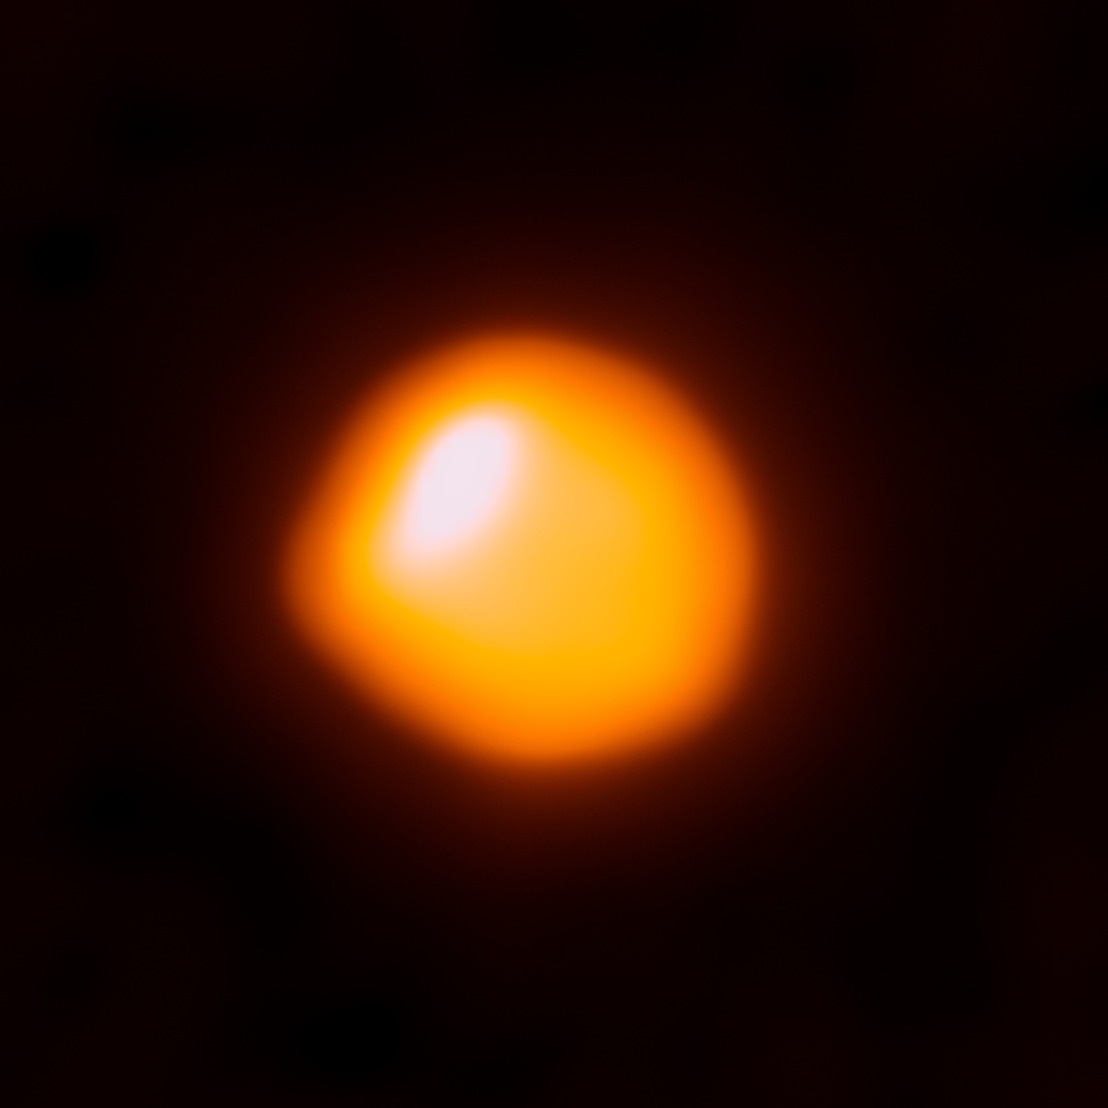 Betelgeuse is about 50% brighter than normal.  What’s going on?